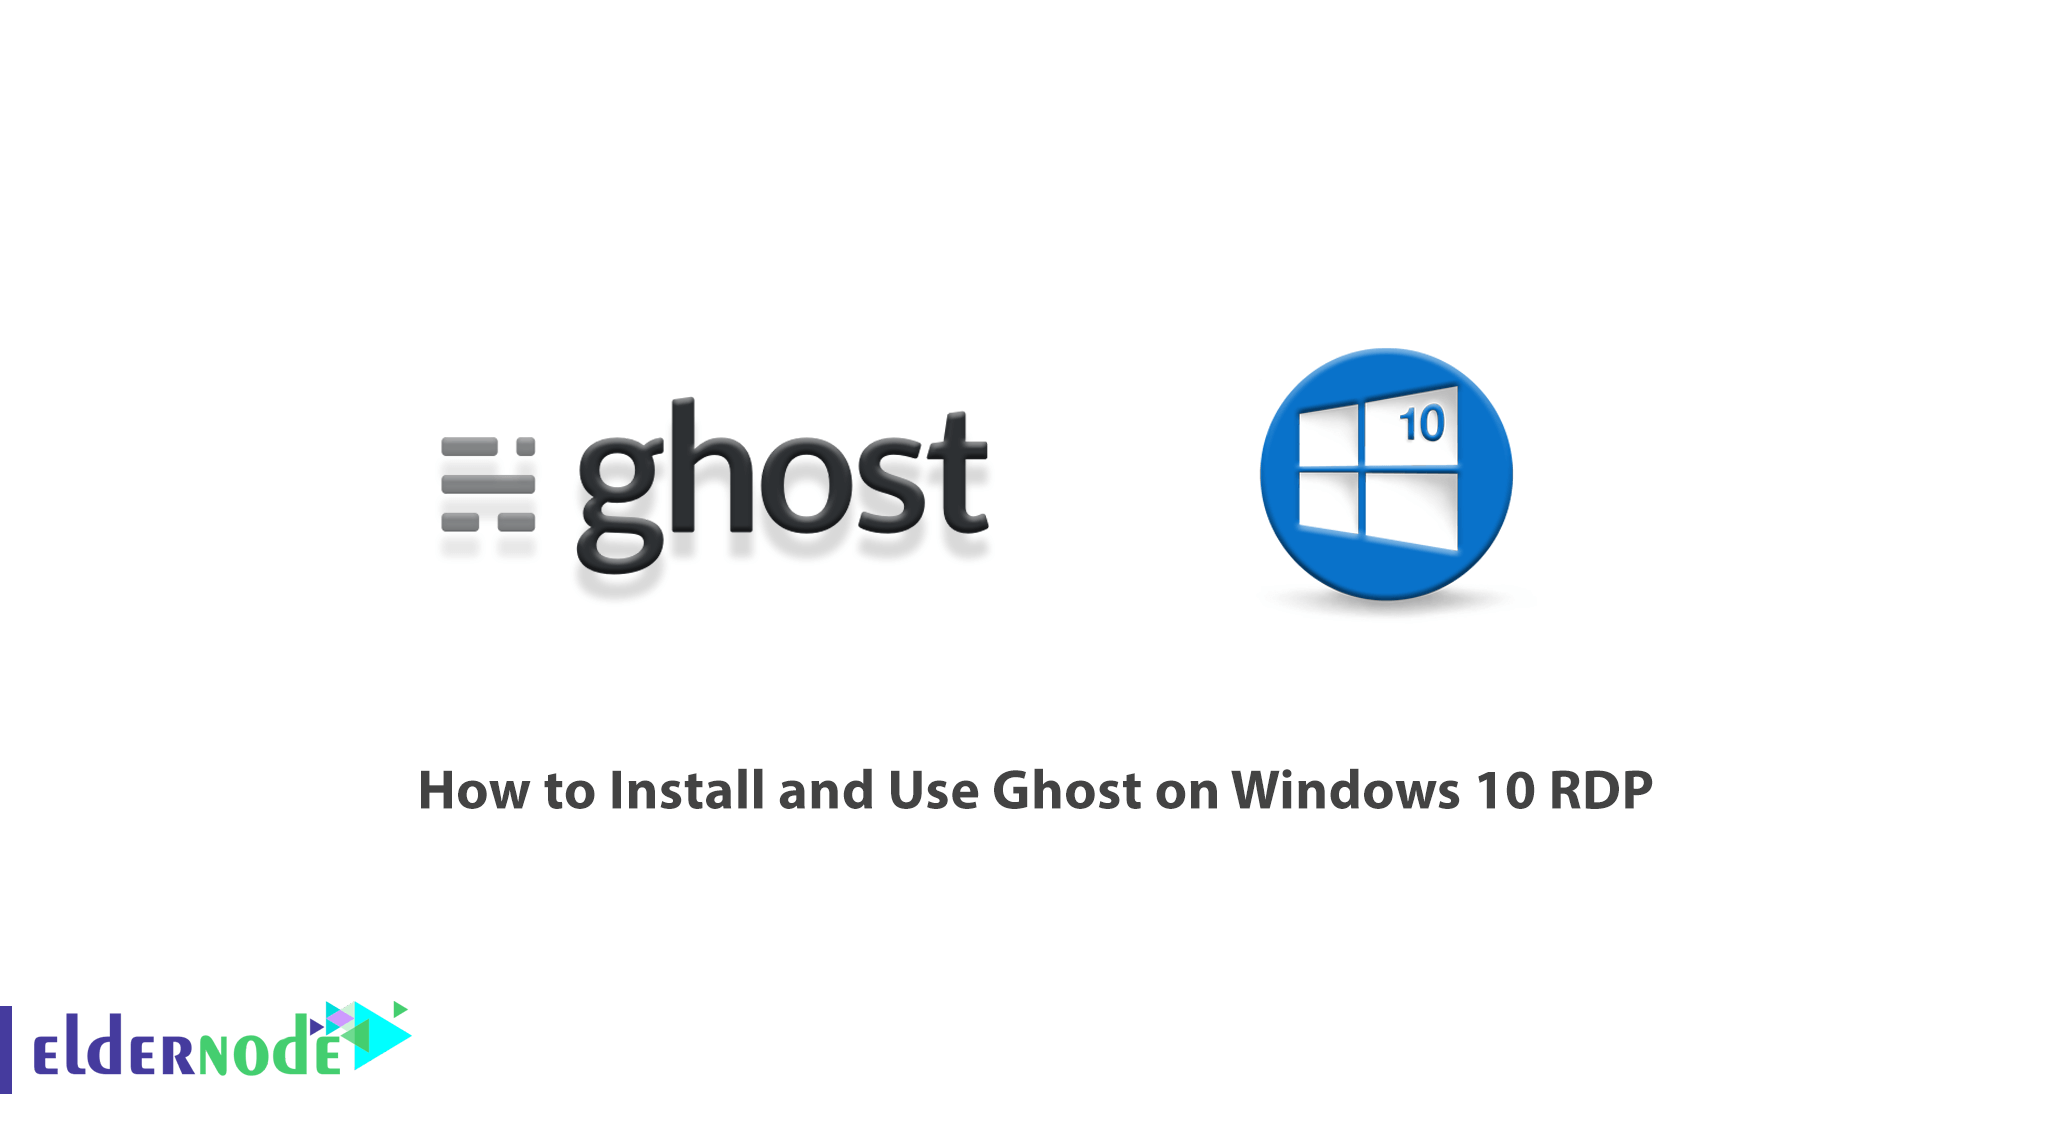 How to Install and Use Ghost on Windows 10 RDP